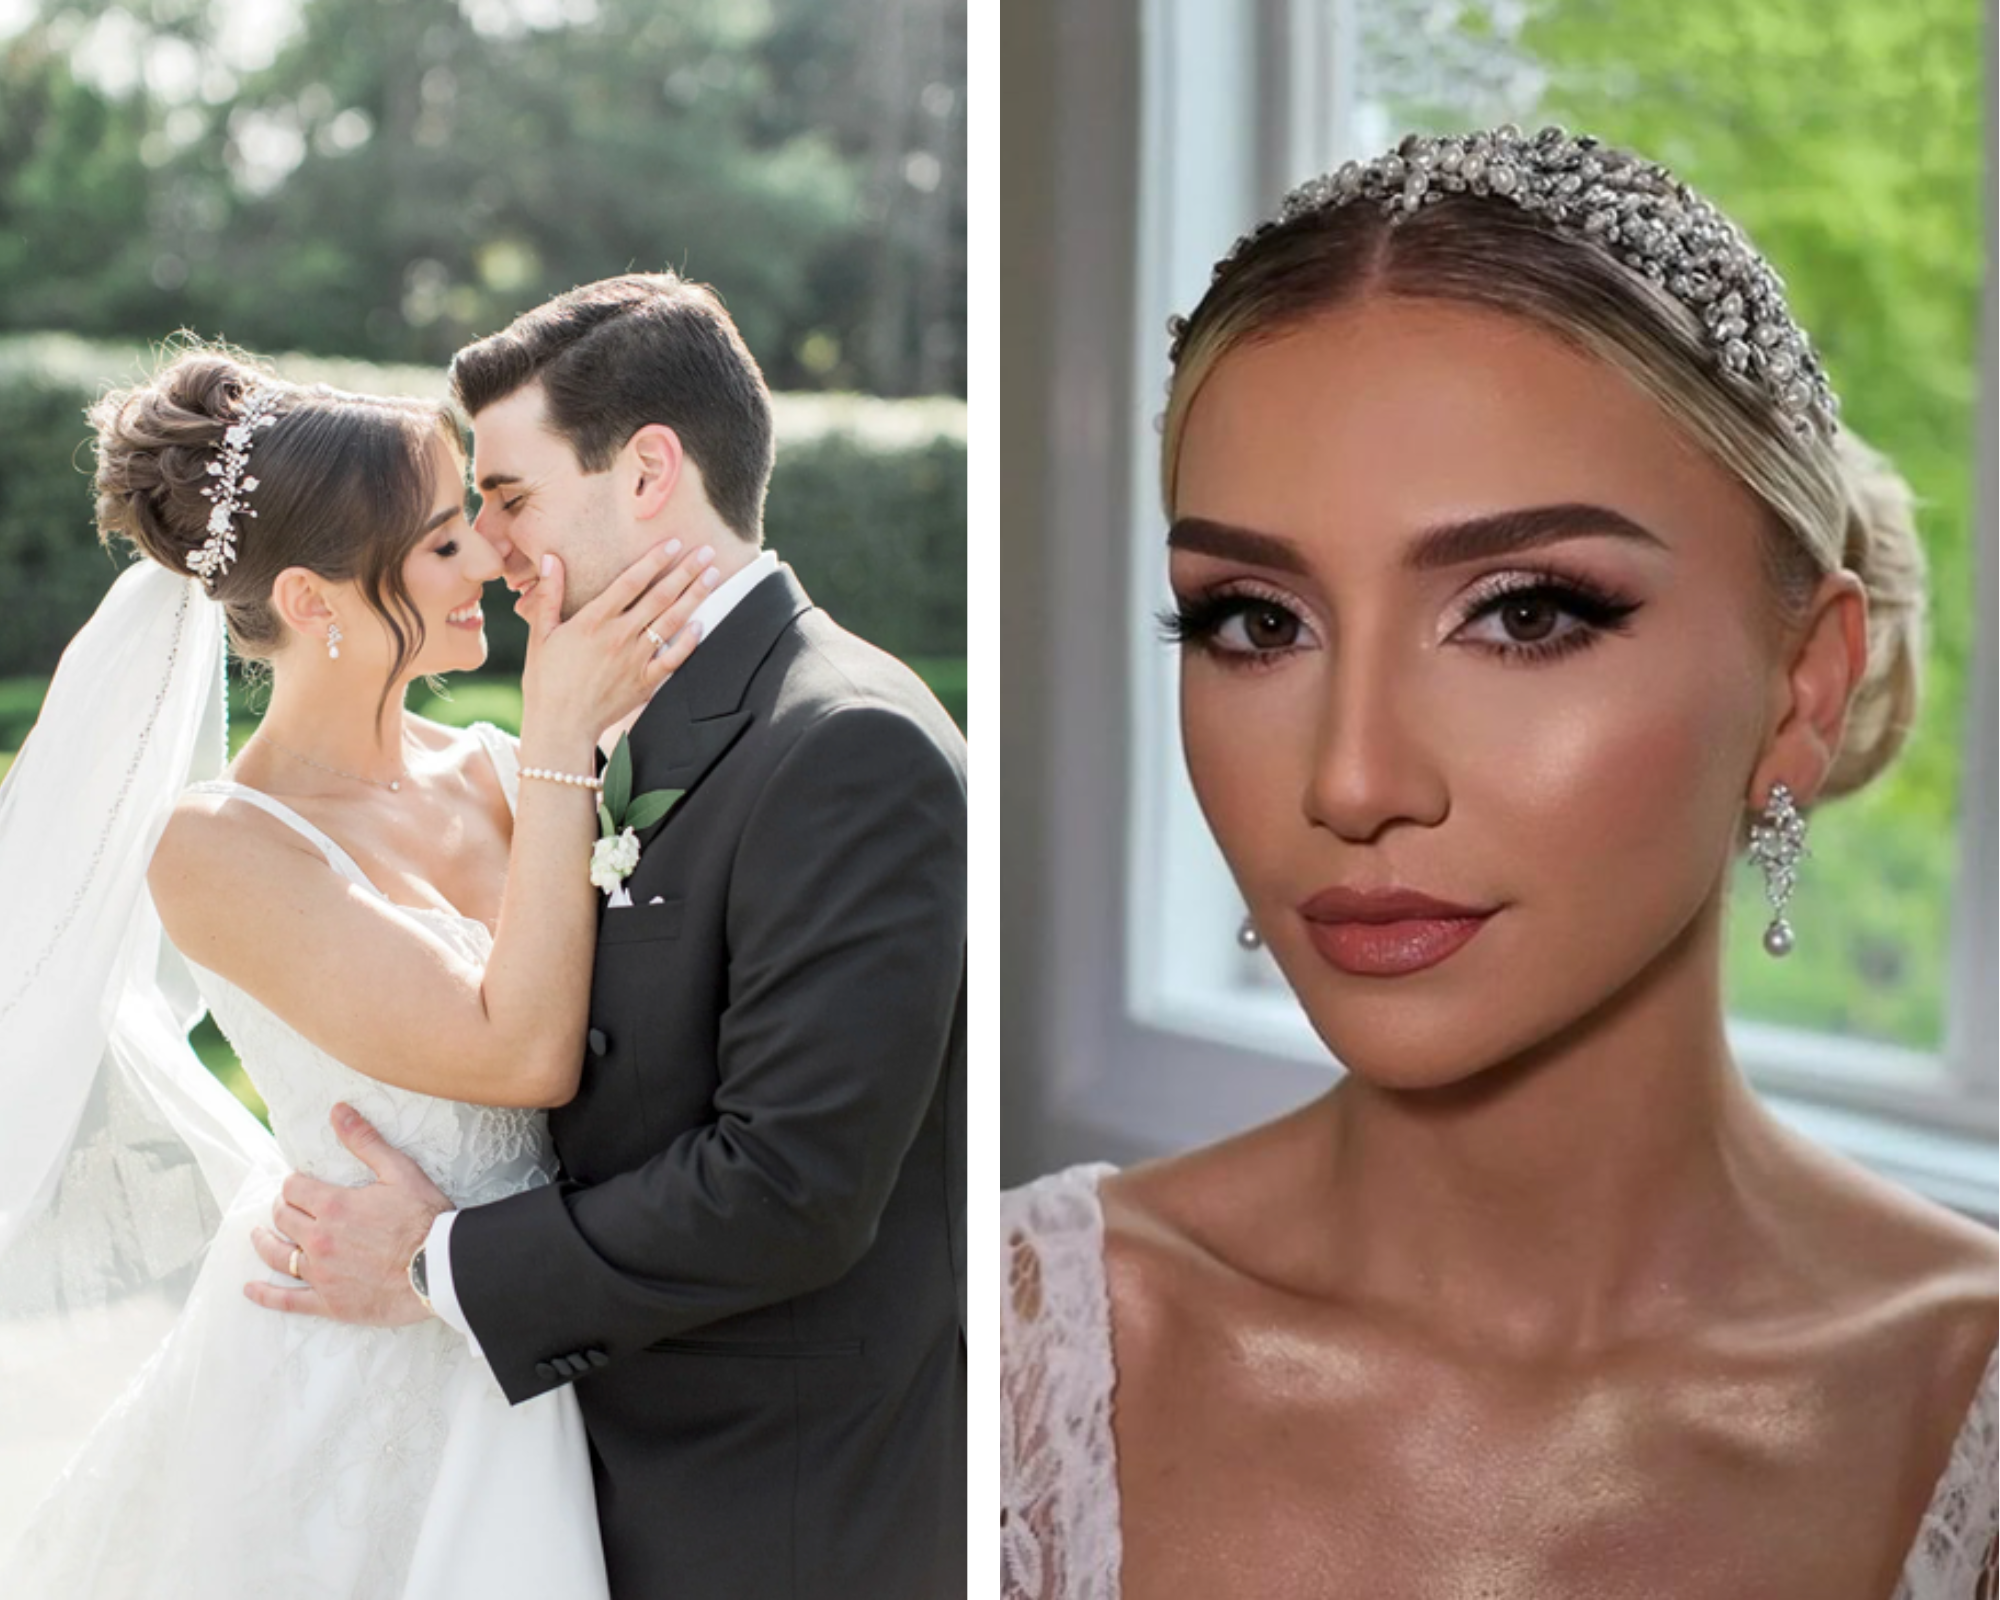 Two separate images of brides wearing pearl and crystal wedding headpiece with pearl bridal earrings